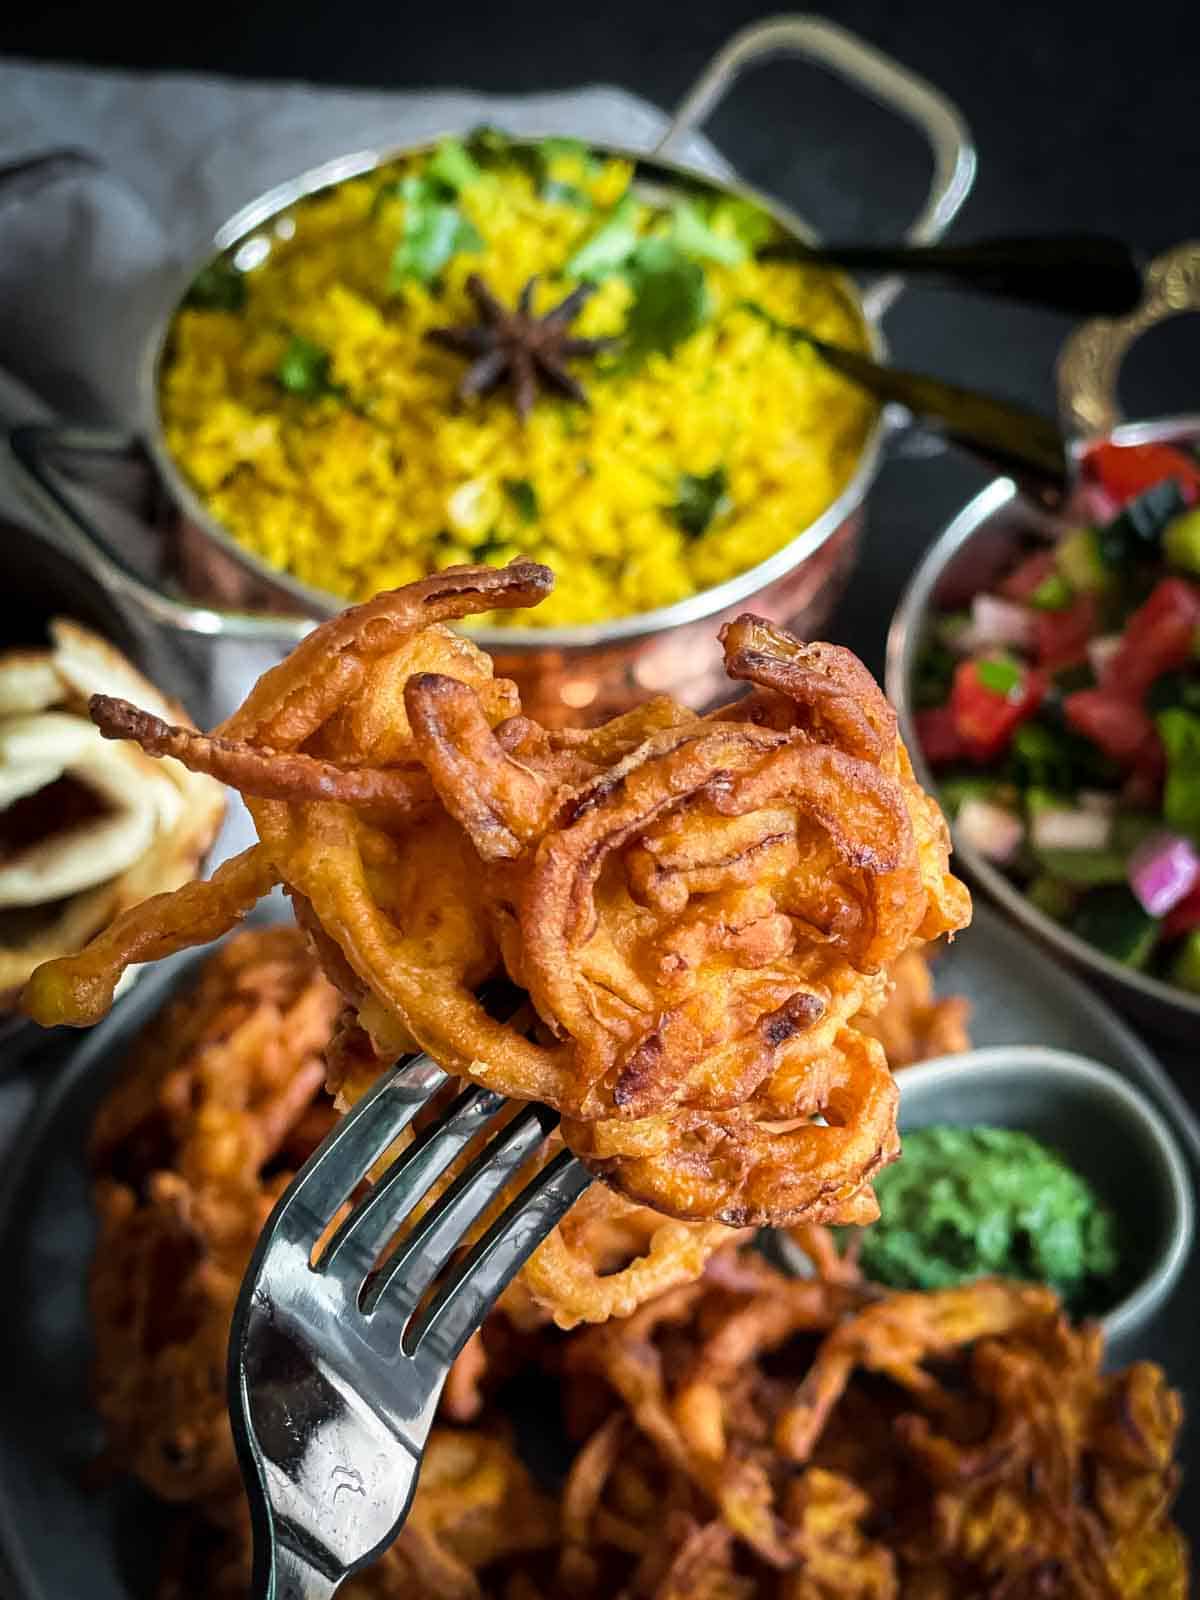 Close up of an onion bhaji on a fork served with turmeric rice, coriander chutney and kachumber